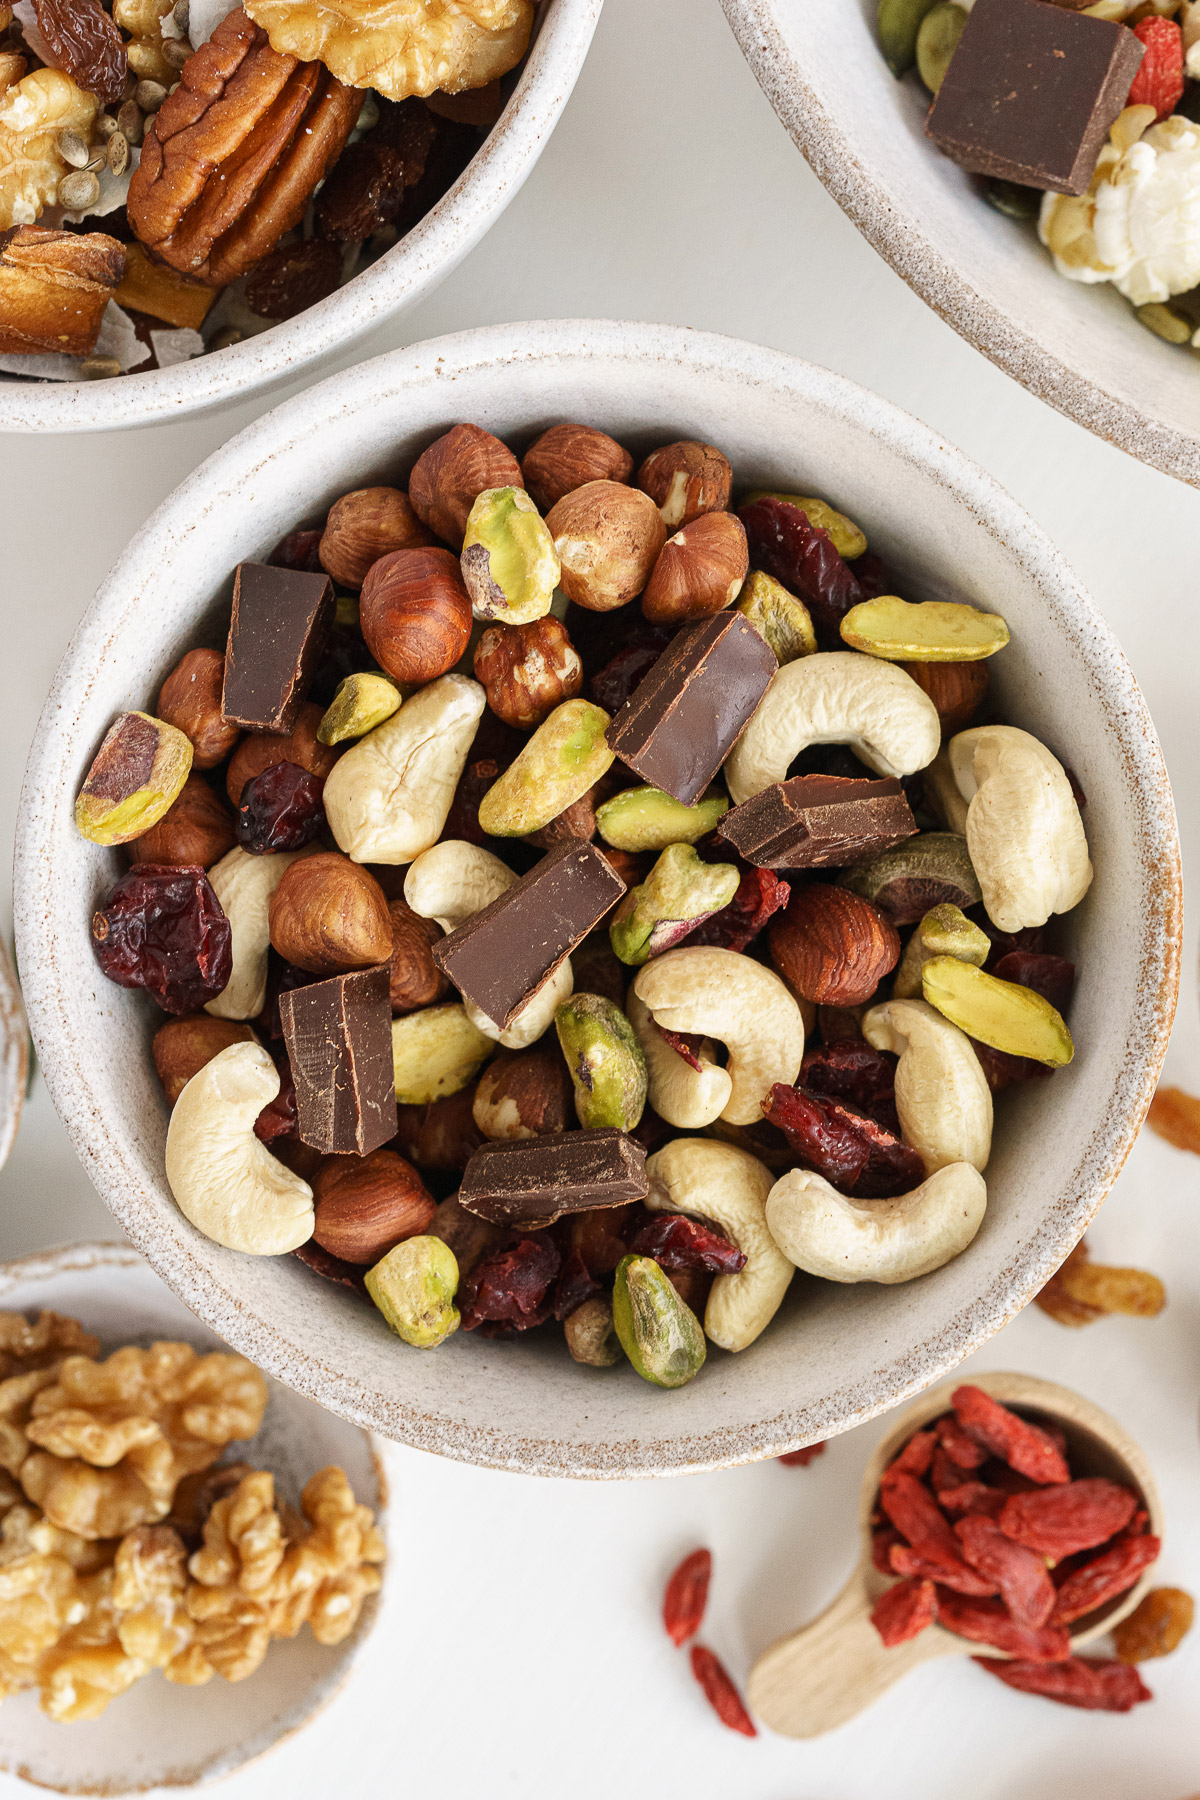 How To Build a Healthy Trail Mix - The Healthy Maven